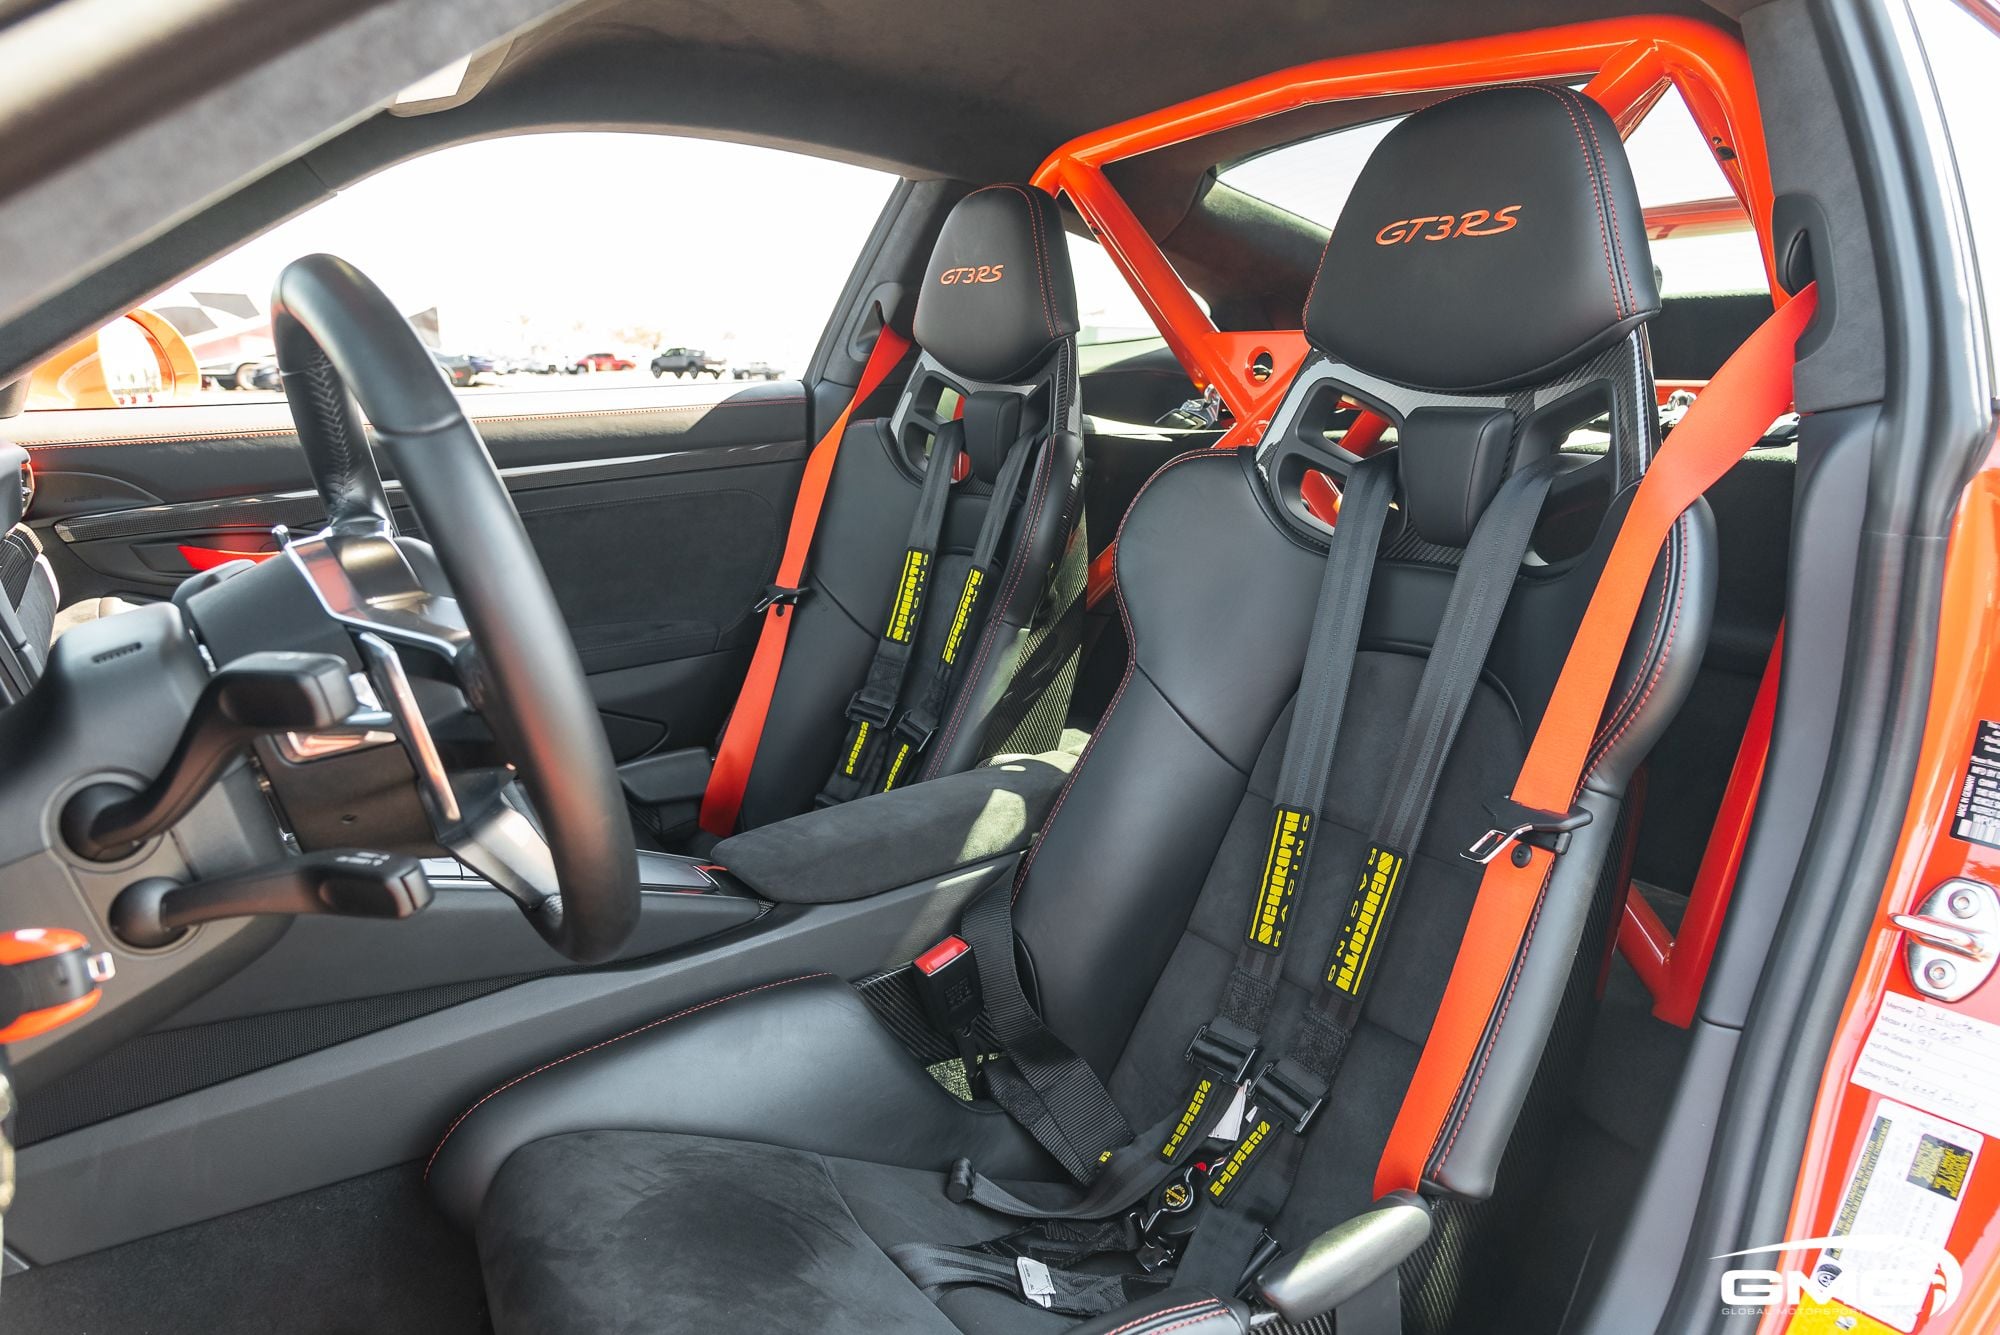 2016 Porsche GT3 - GMG Racing - Stunning Track Prepped Lava Orange 991.1 GT3 RS For Sale! - Used - VIN WP0AF2A98GS192150 - 5,400 Miles - 6 cyl - 2WD - Automatic - Coupe - Orange - Southern California, CA 92704, United States